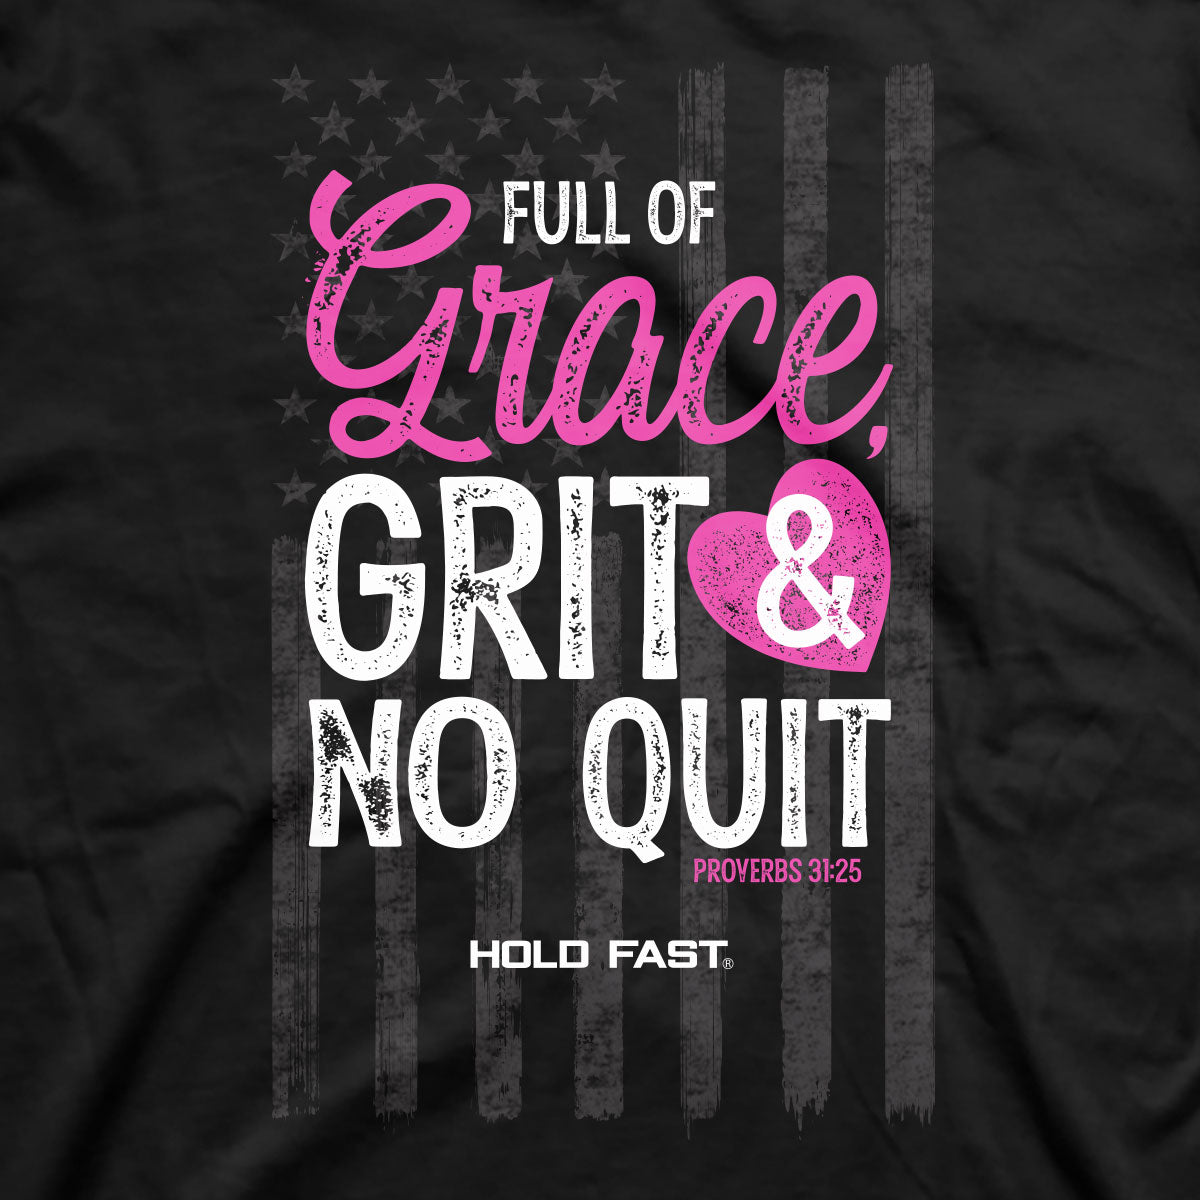 HOLD FAST Womens T-Shirt Grace & Grit